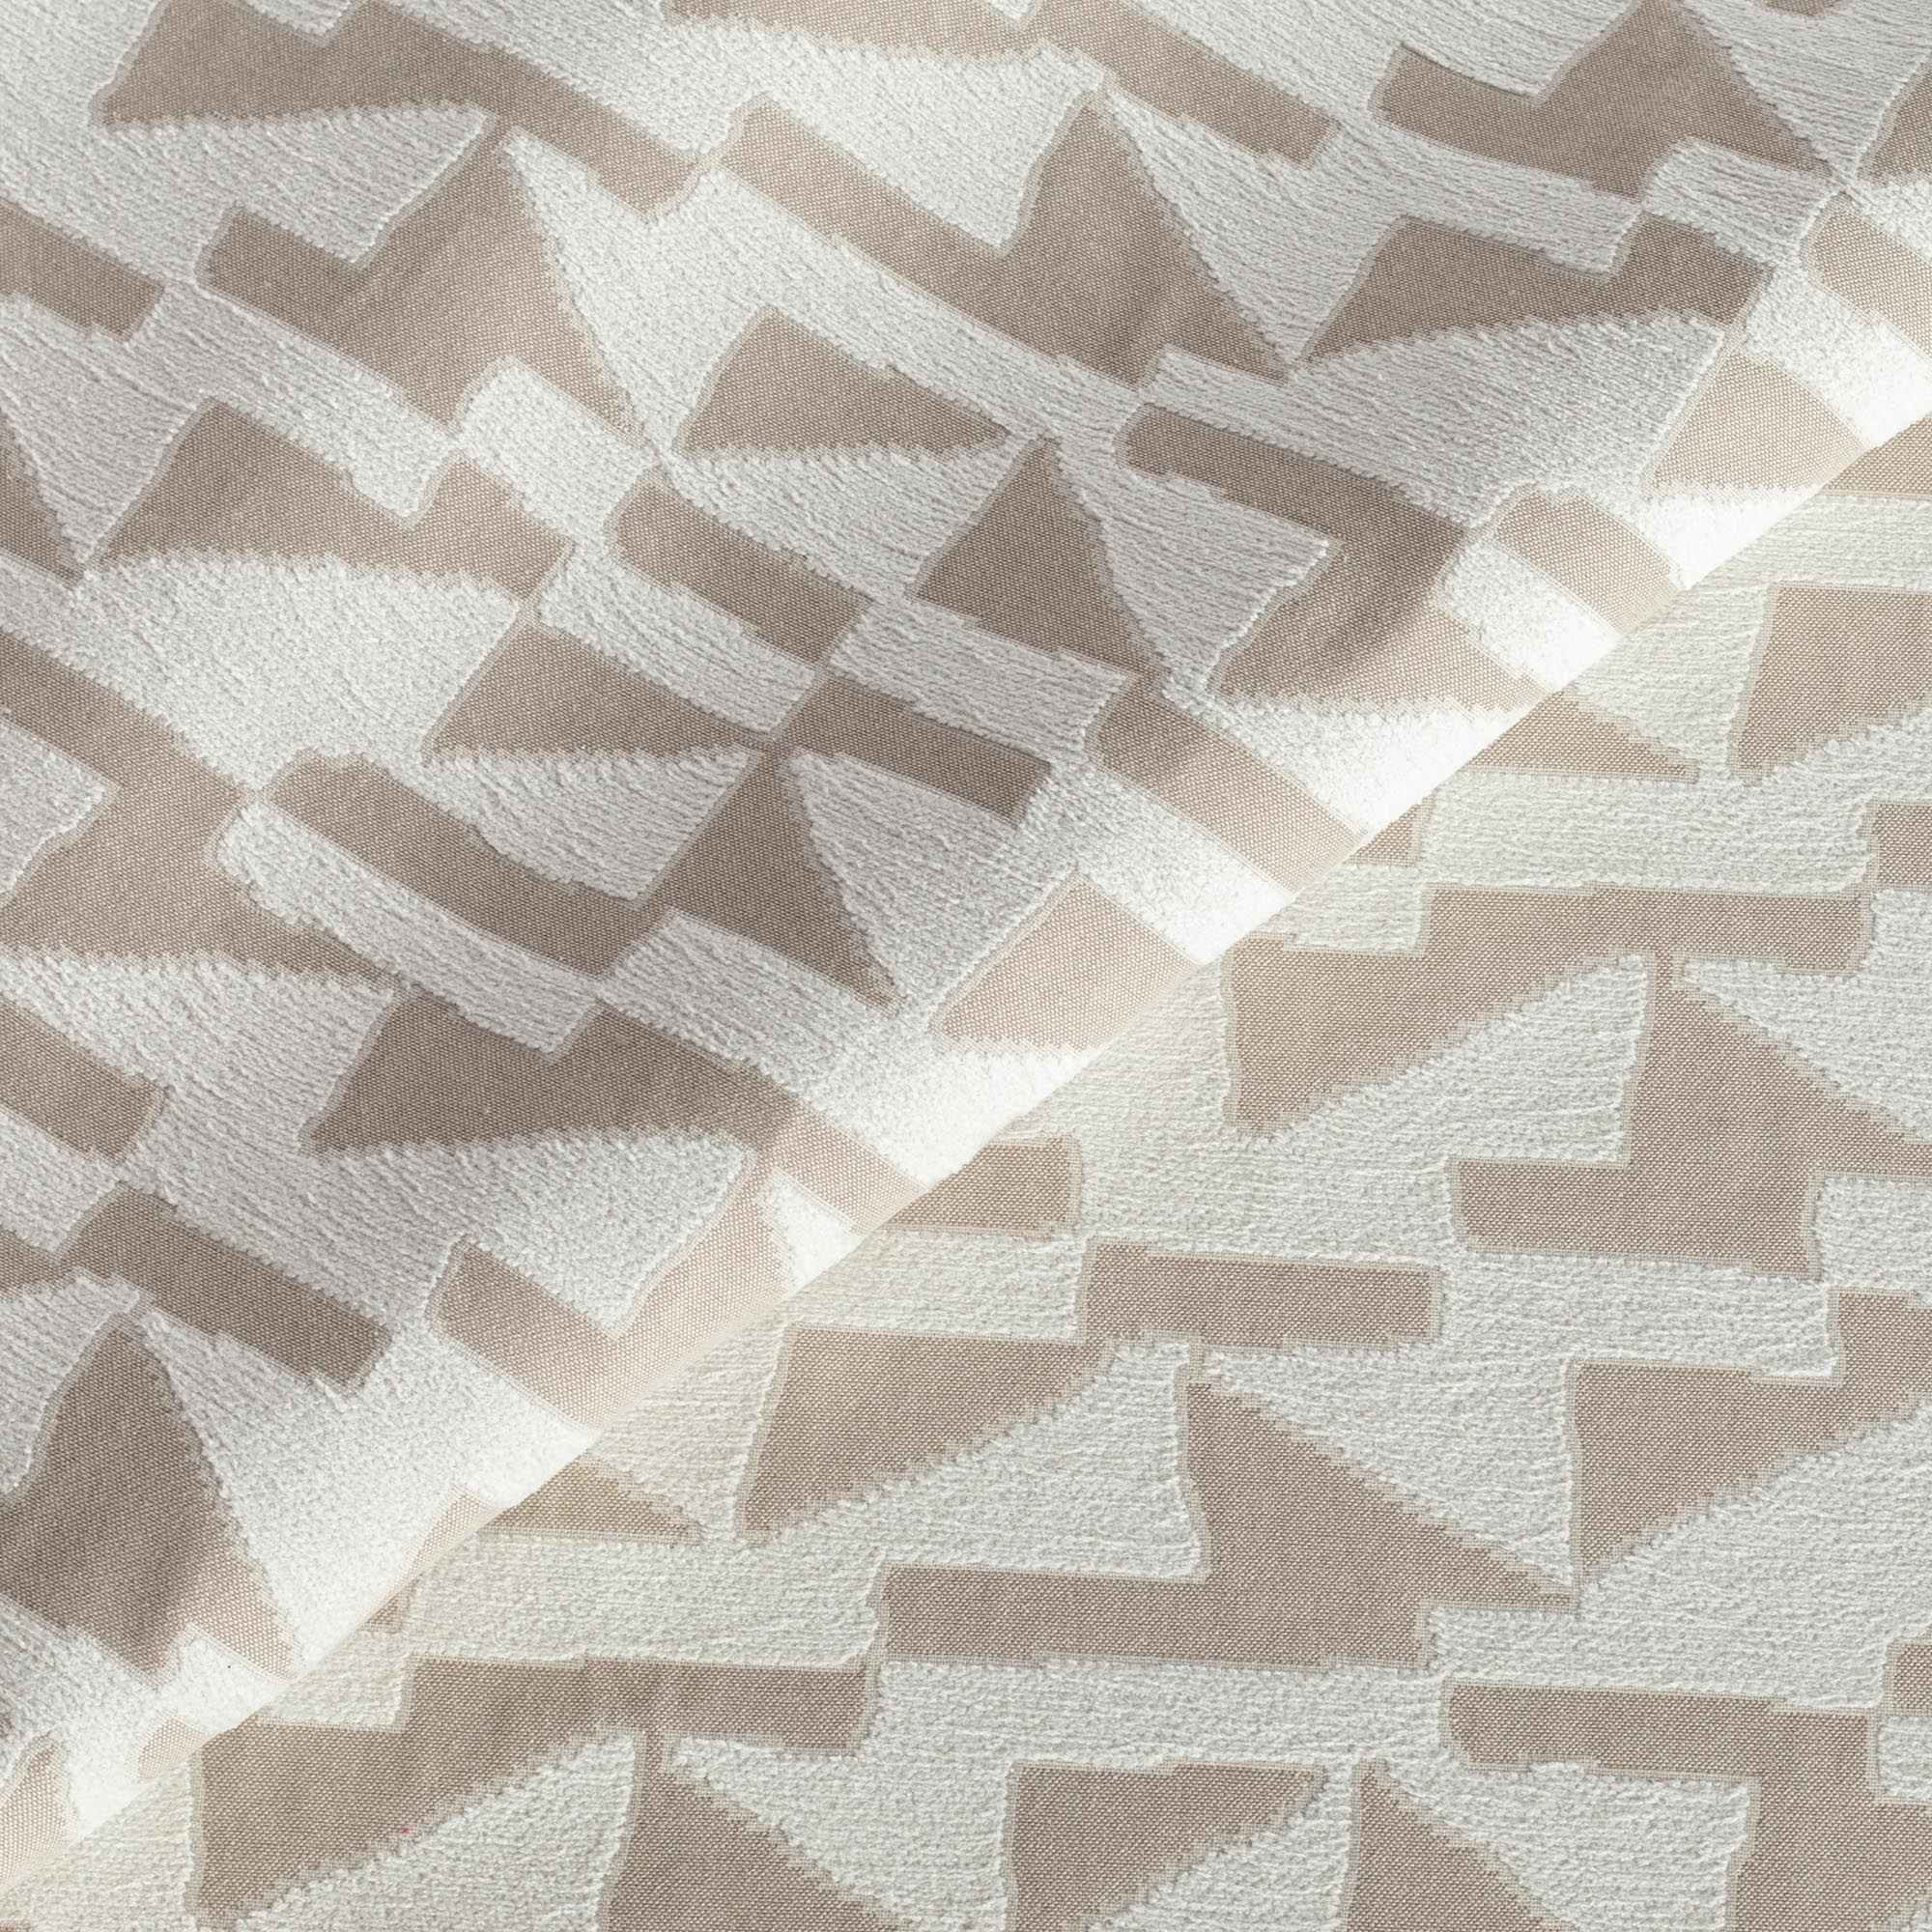 Pueblo cream and tan abstract geometric pattern indoor outdoor fabric from Tonic Living